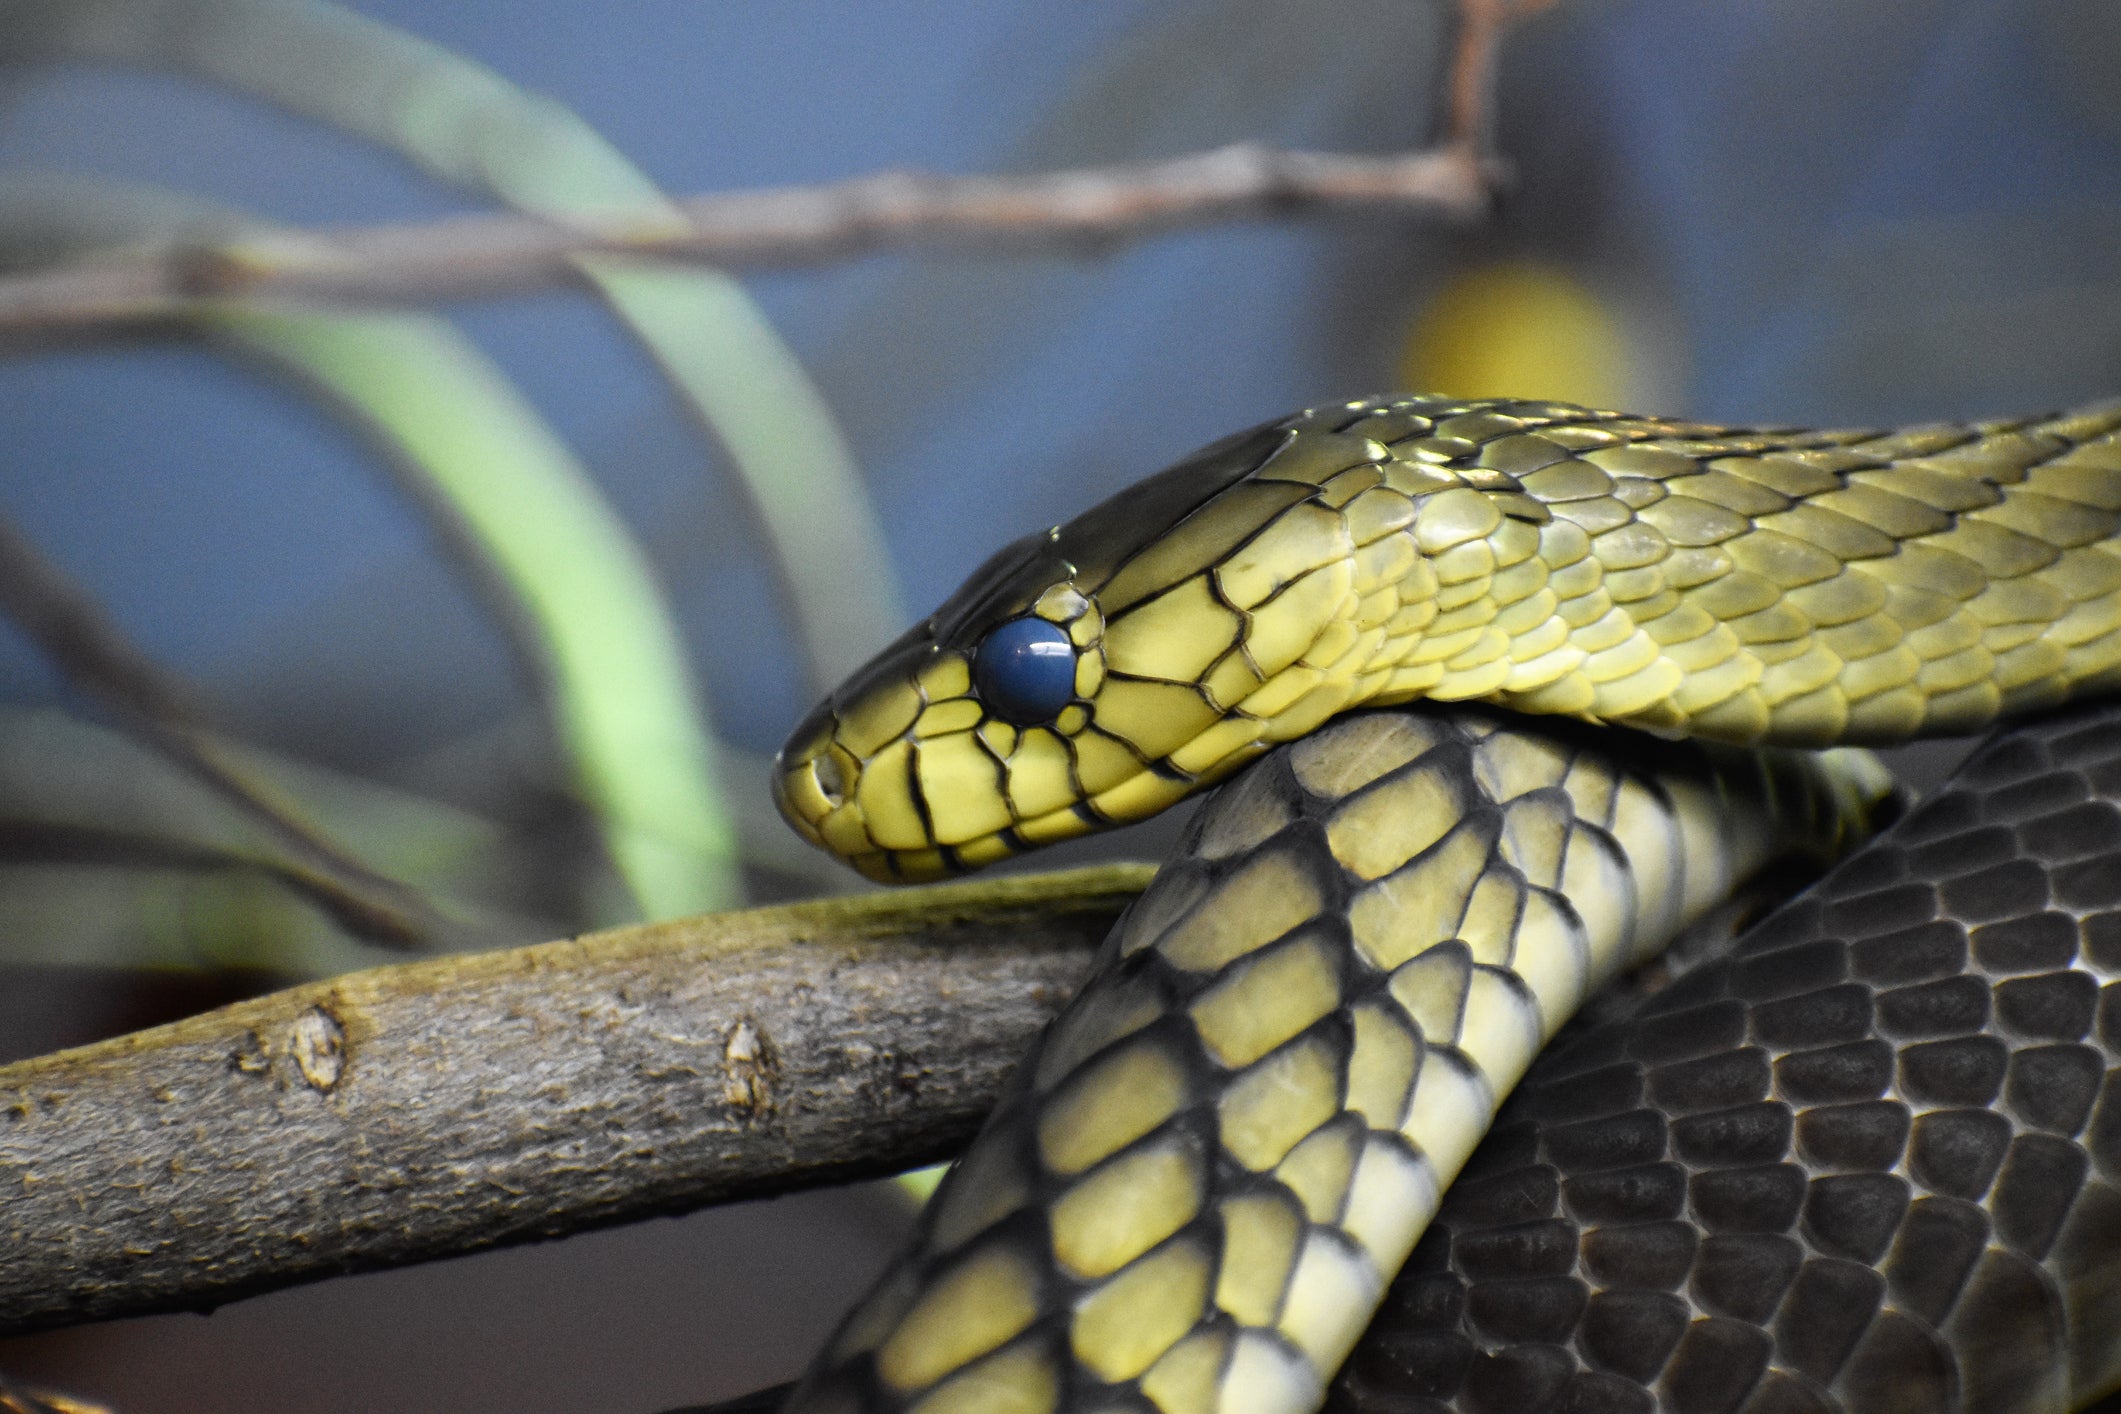 Venomous snake attacks rising in the UK | The Independent